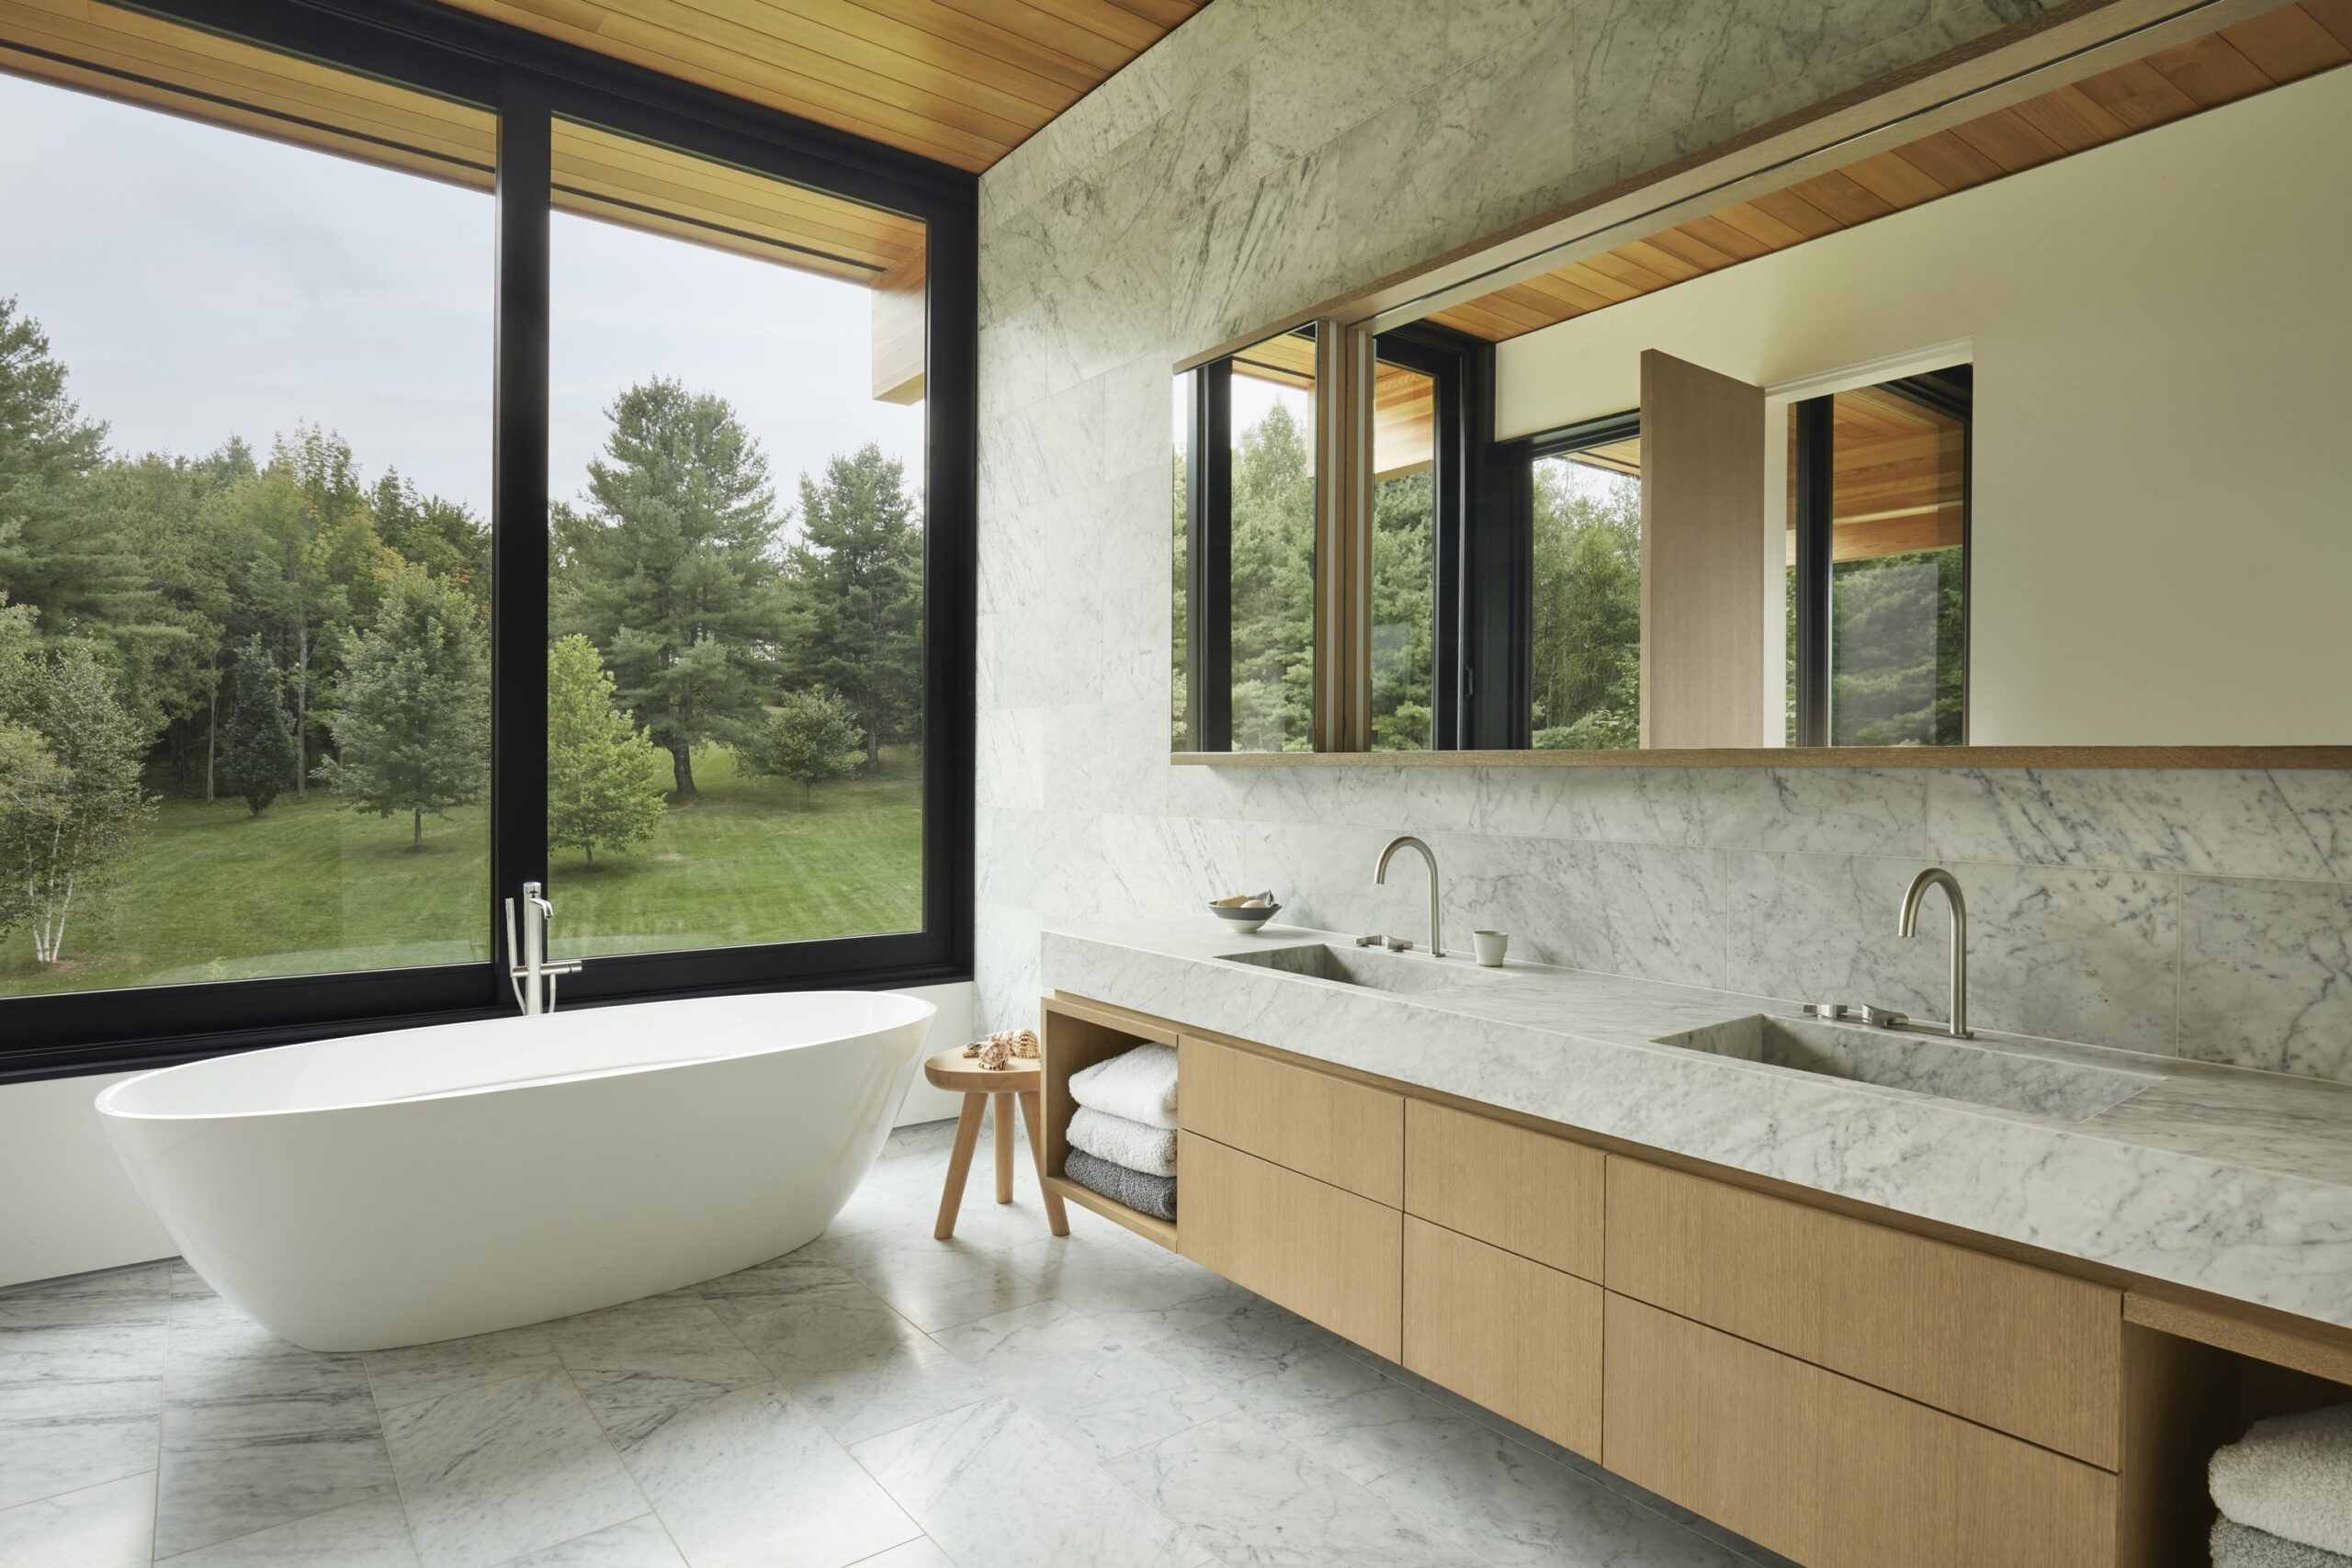 Bathroom with freestanding tub, double sinks, and view of forest landscape